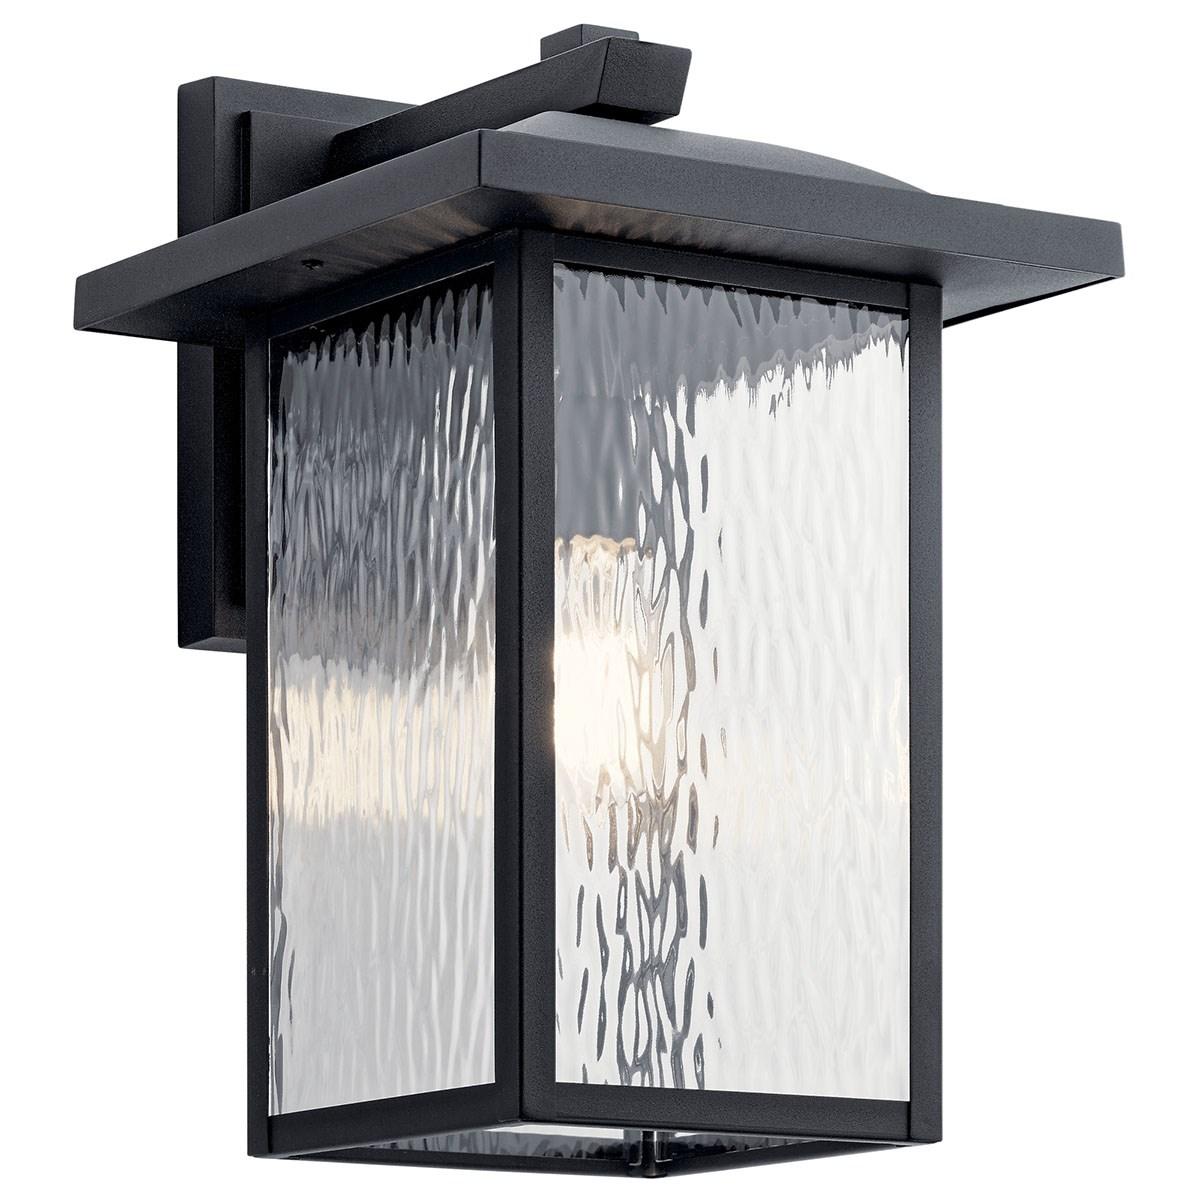 Capanna 13 in. Outdoor Wall Sconce - Bees Lighting